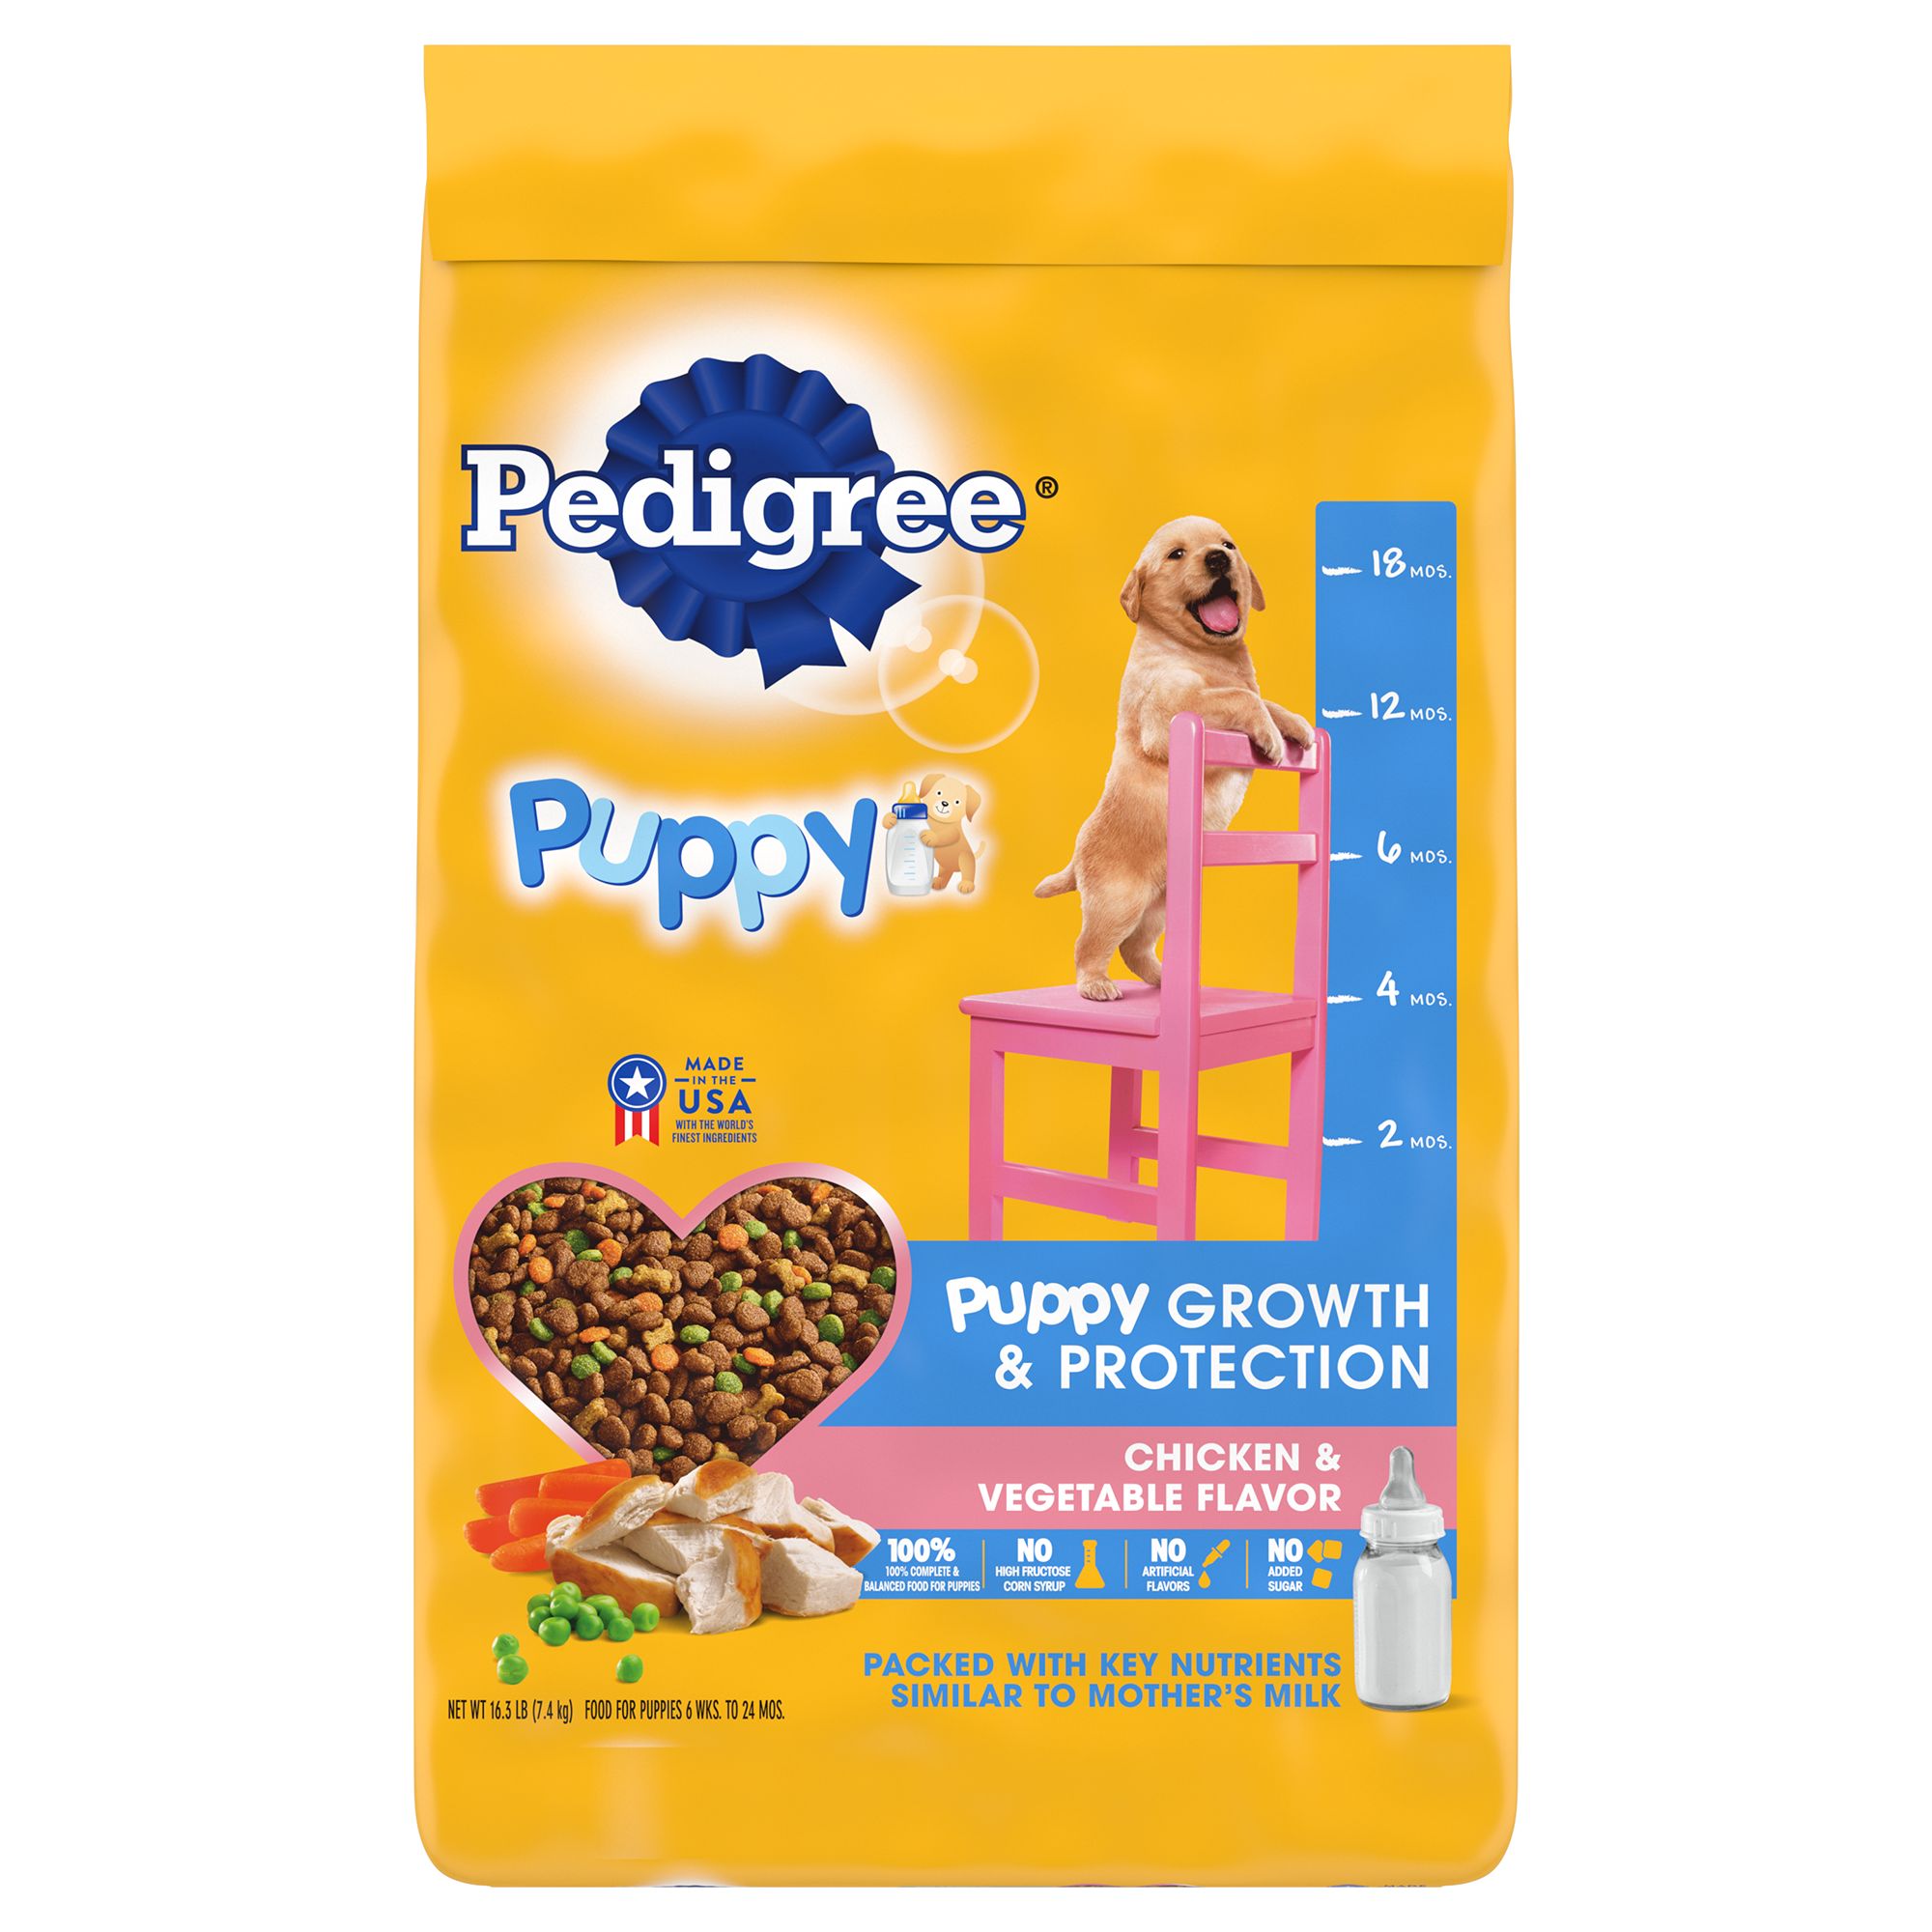 Pedigree Puppy Food for Puppies, Chicken & Vegetable Flavor - 3.5 lb